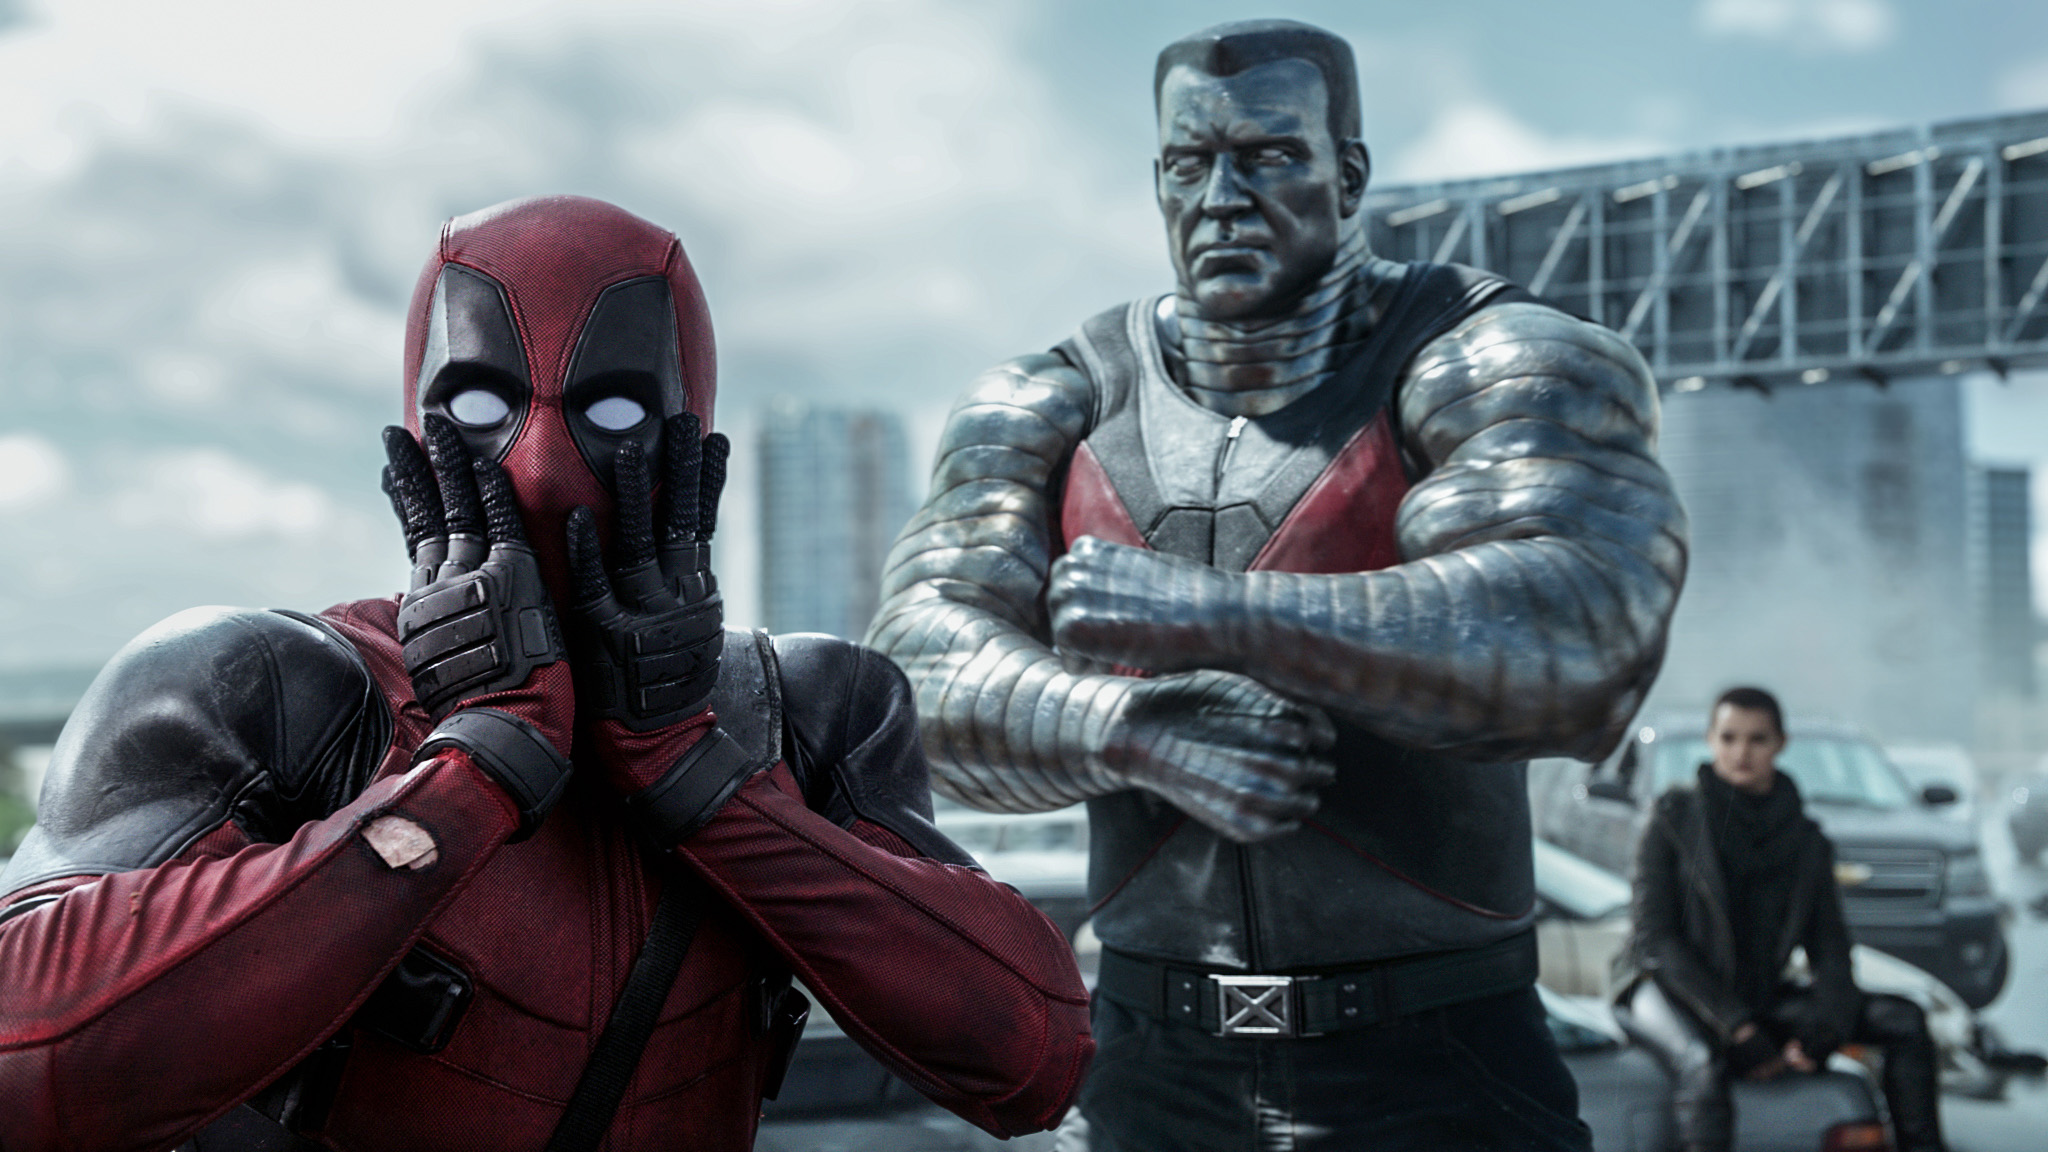 Deadpool (Ryan Reynolds) reacts to Colossus’ (voiced by Stefan Kapicic) threats.